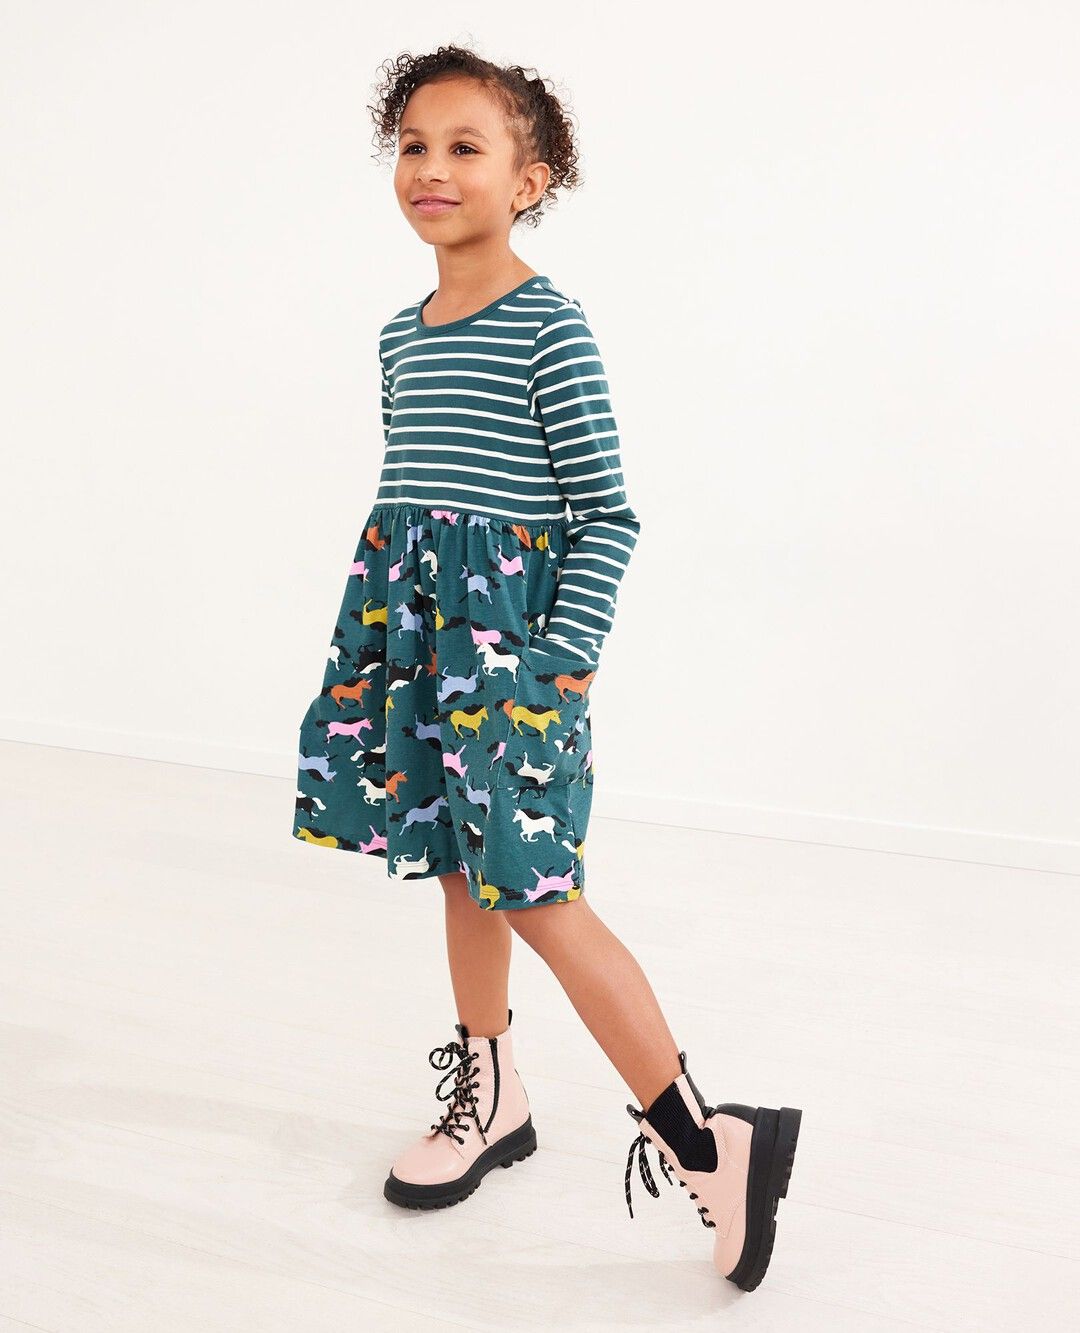 Mixie Playdress | Hanna Andersson